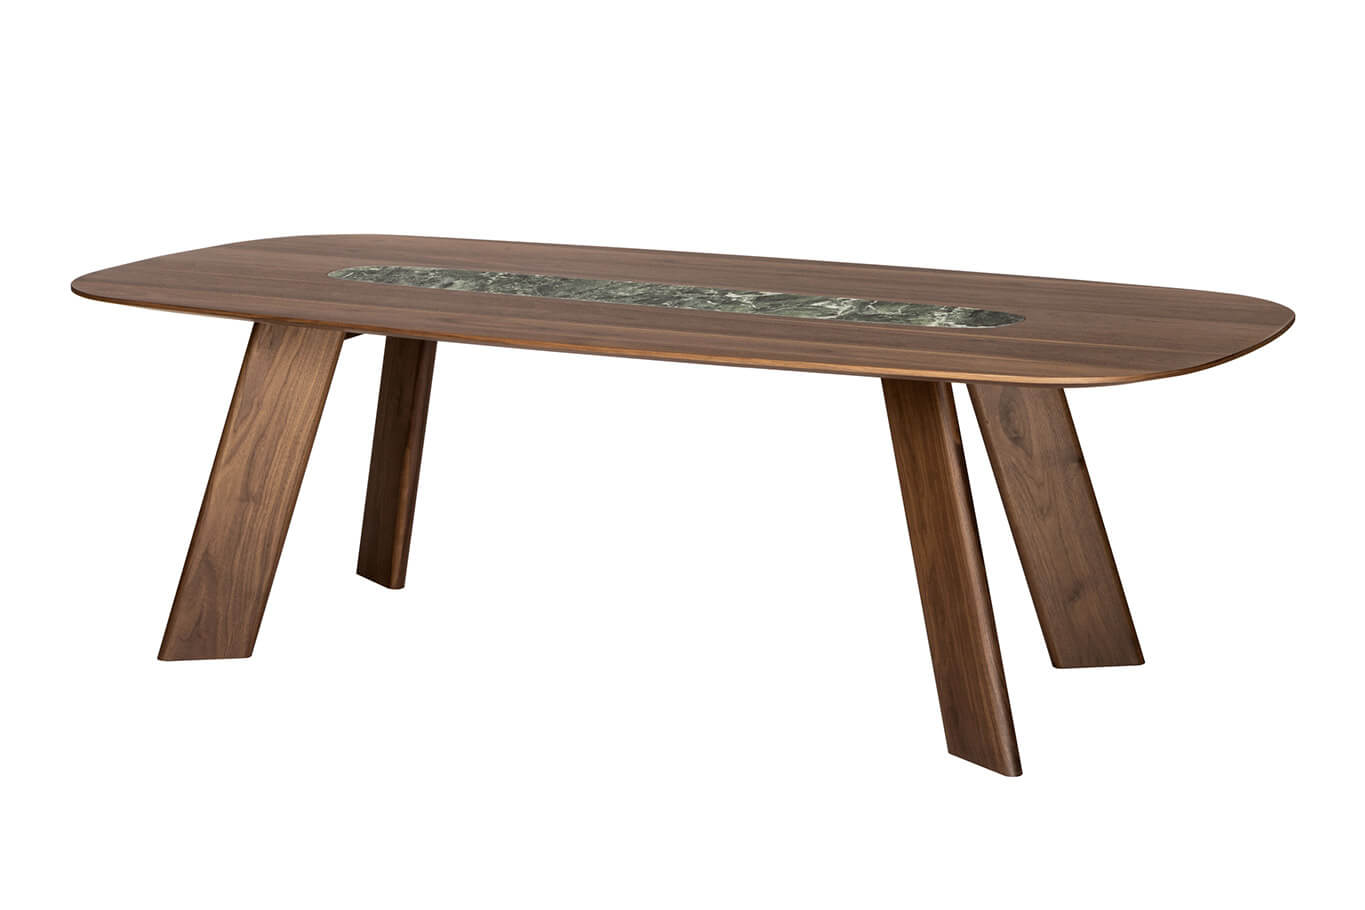 Alhambra c wcer 001 dining table, with top in wood and ceramic